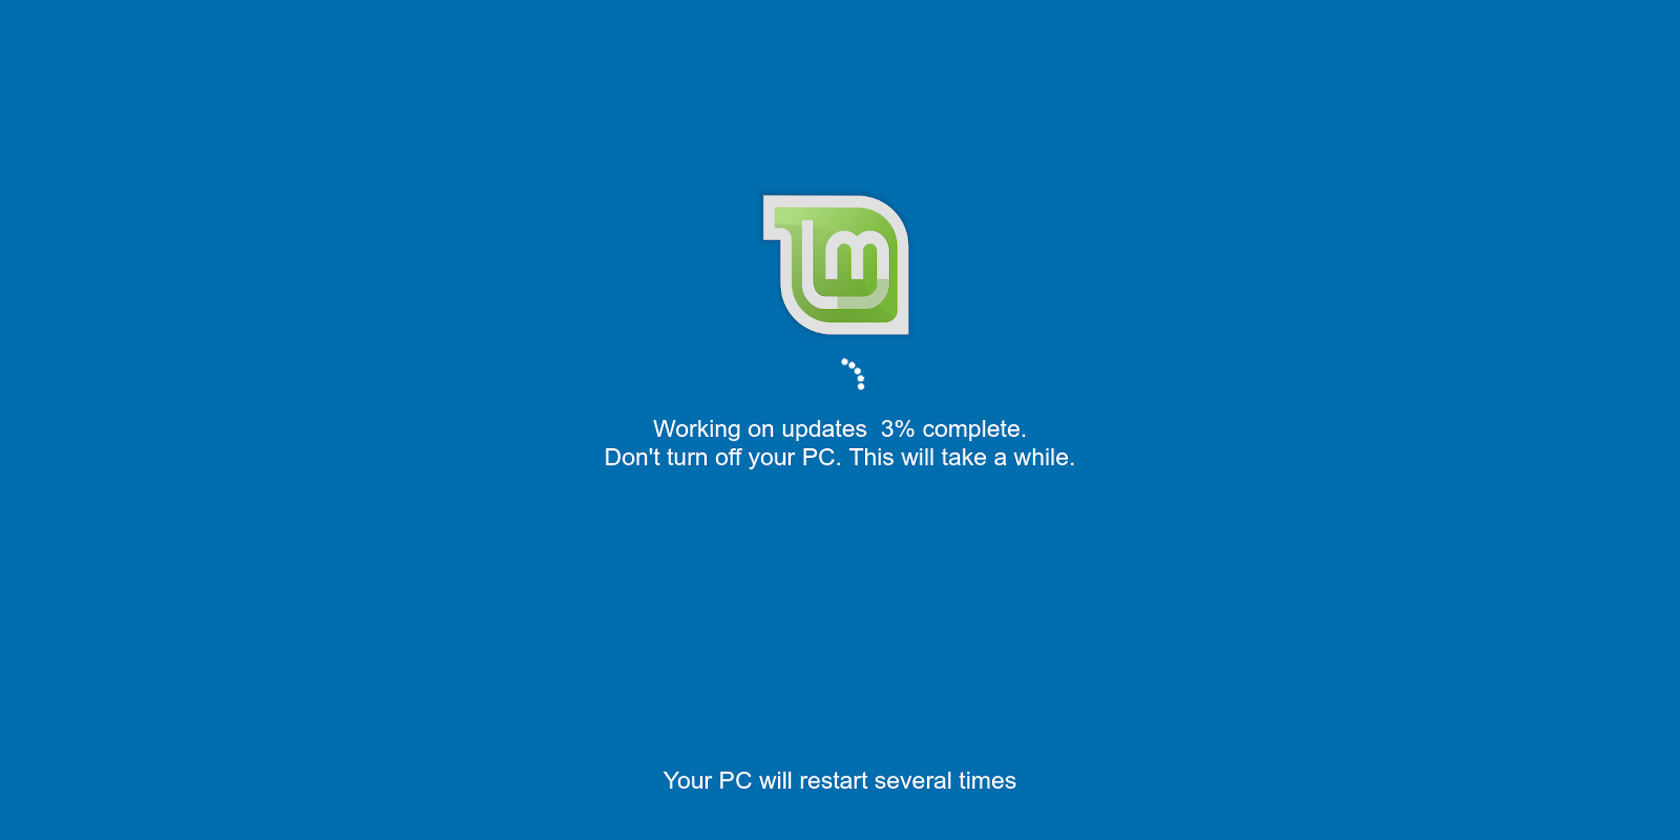 Shock Horror! Is Linux Mint Turning Into Windows?